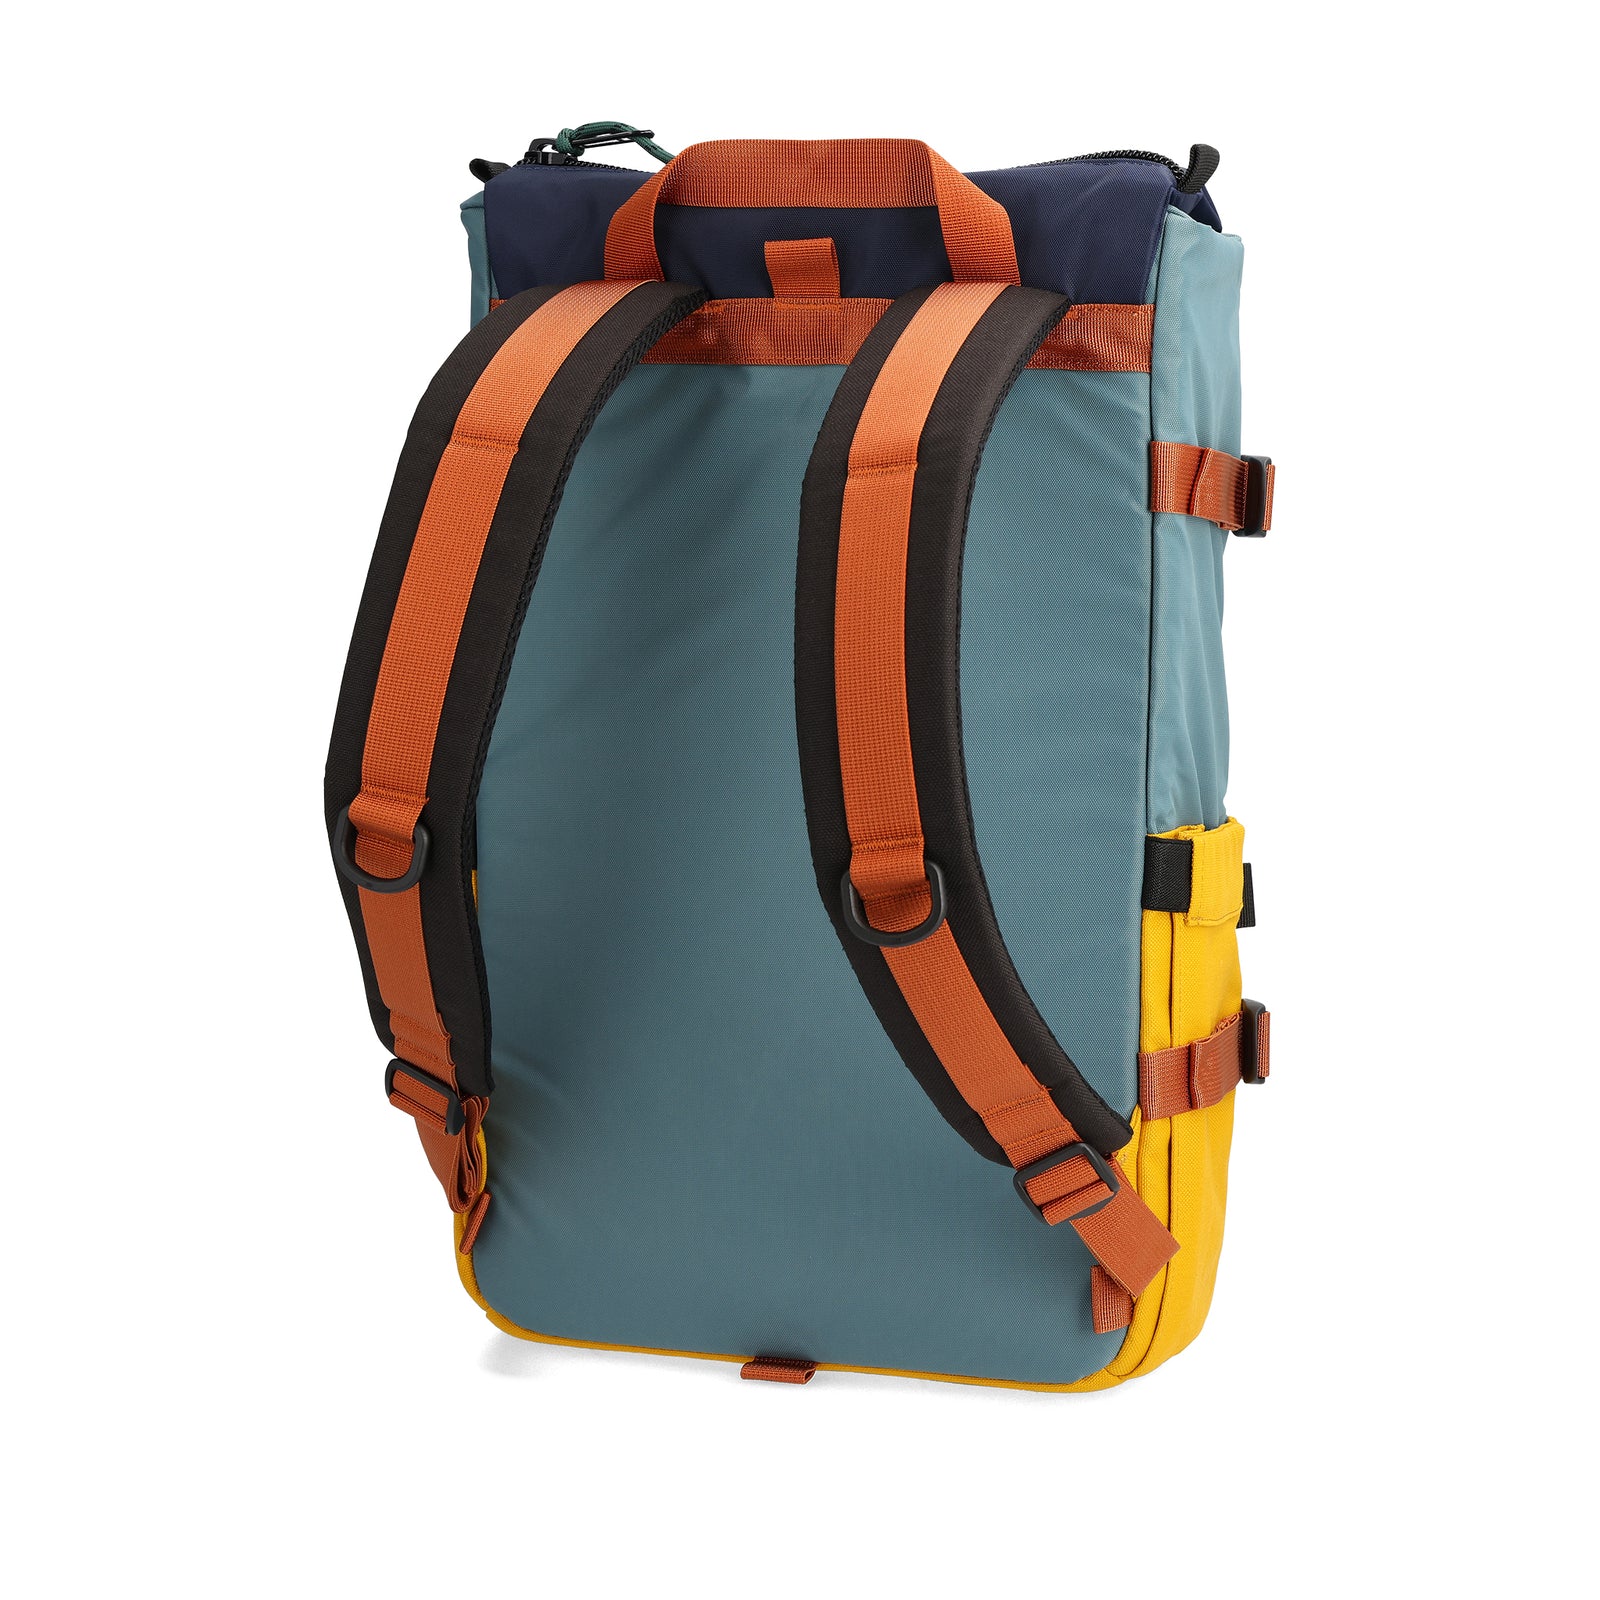 Back View of Topo Designs Rover Pack Classic in "Sea Pine / Mustard"